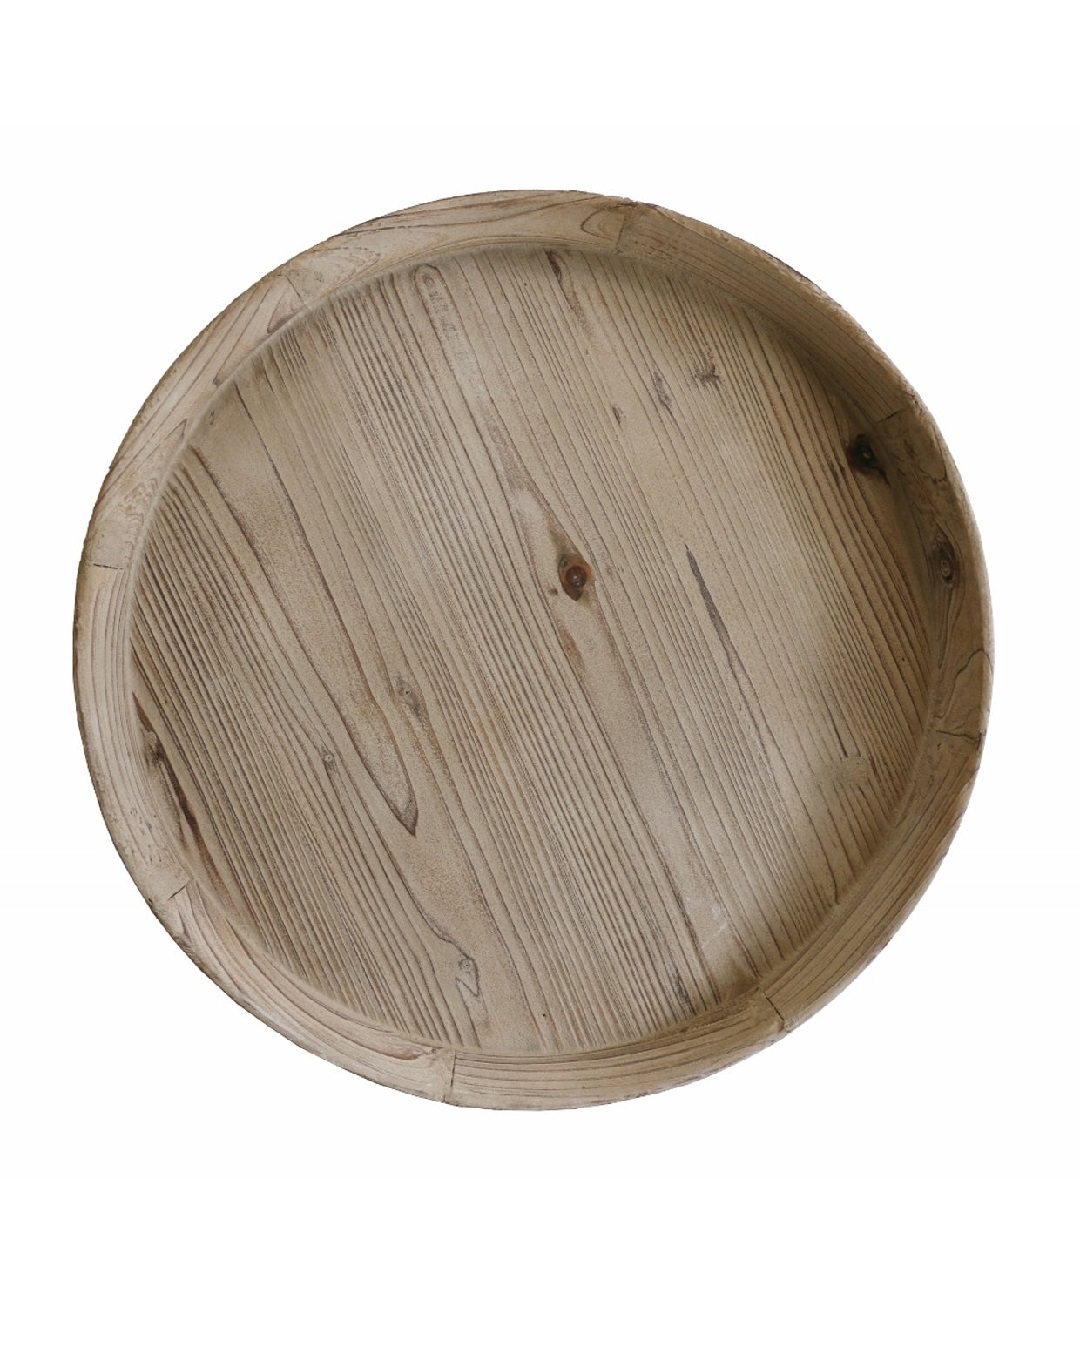 Rustic wooden round tray